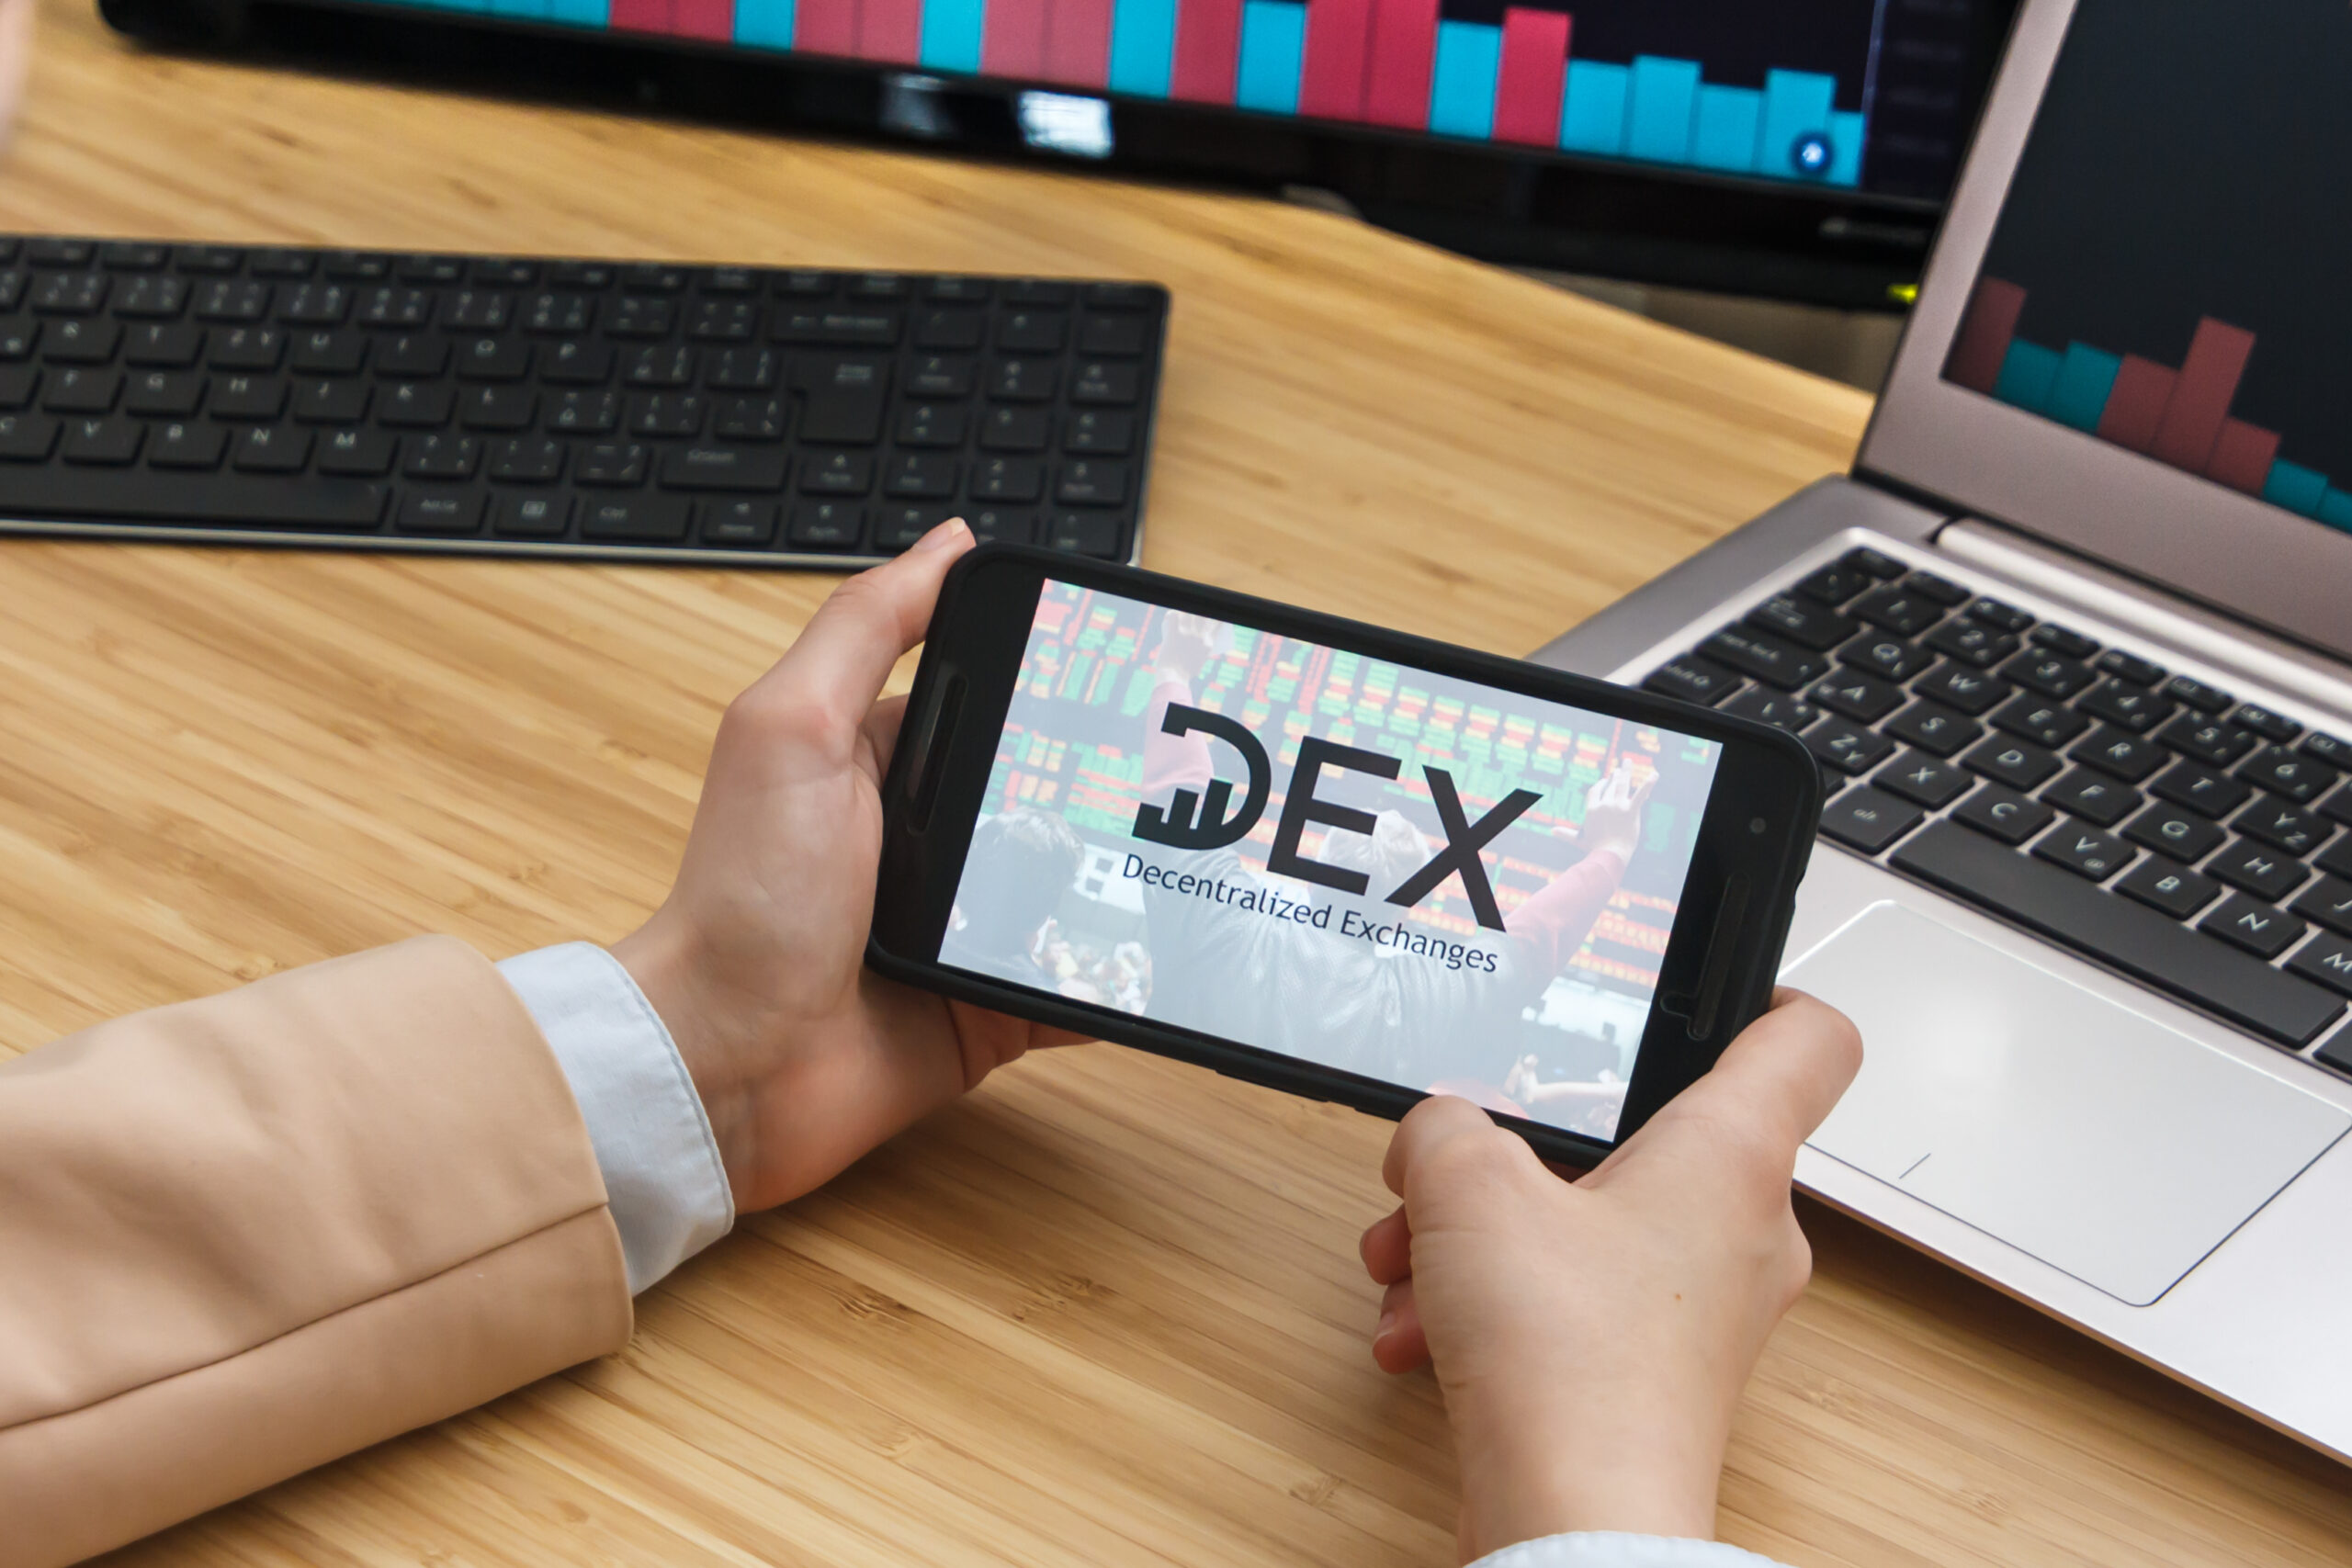 Geek insider, geekinsider, geekinsider. Com,, how to trade on decentralized exchanges (dexs): a step-by-step guide, crypto currency